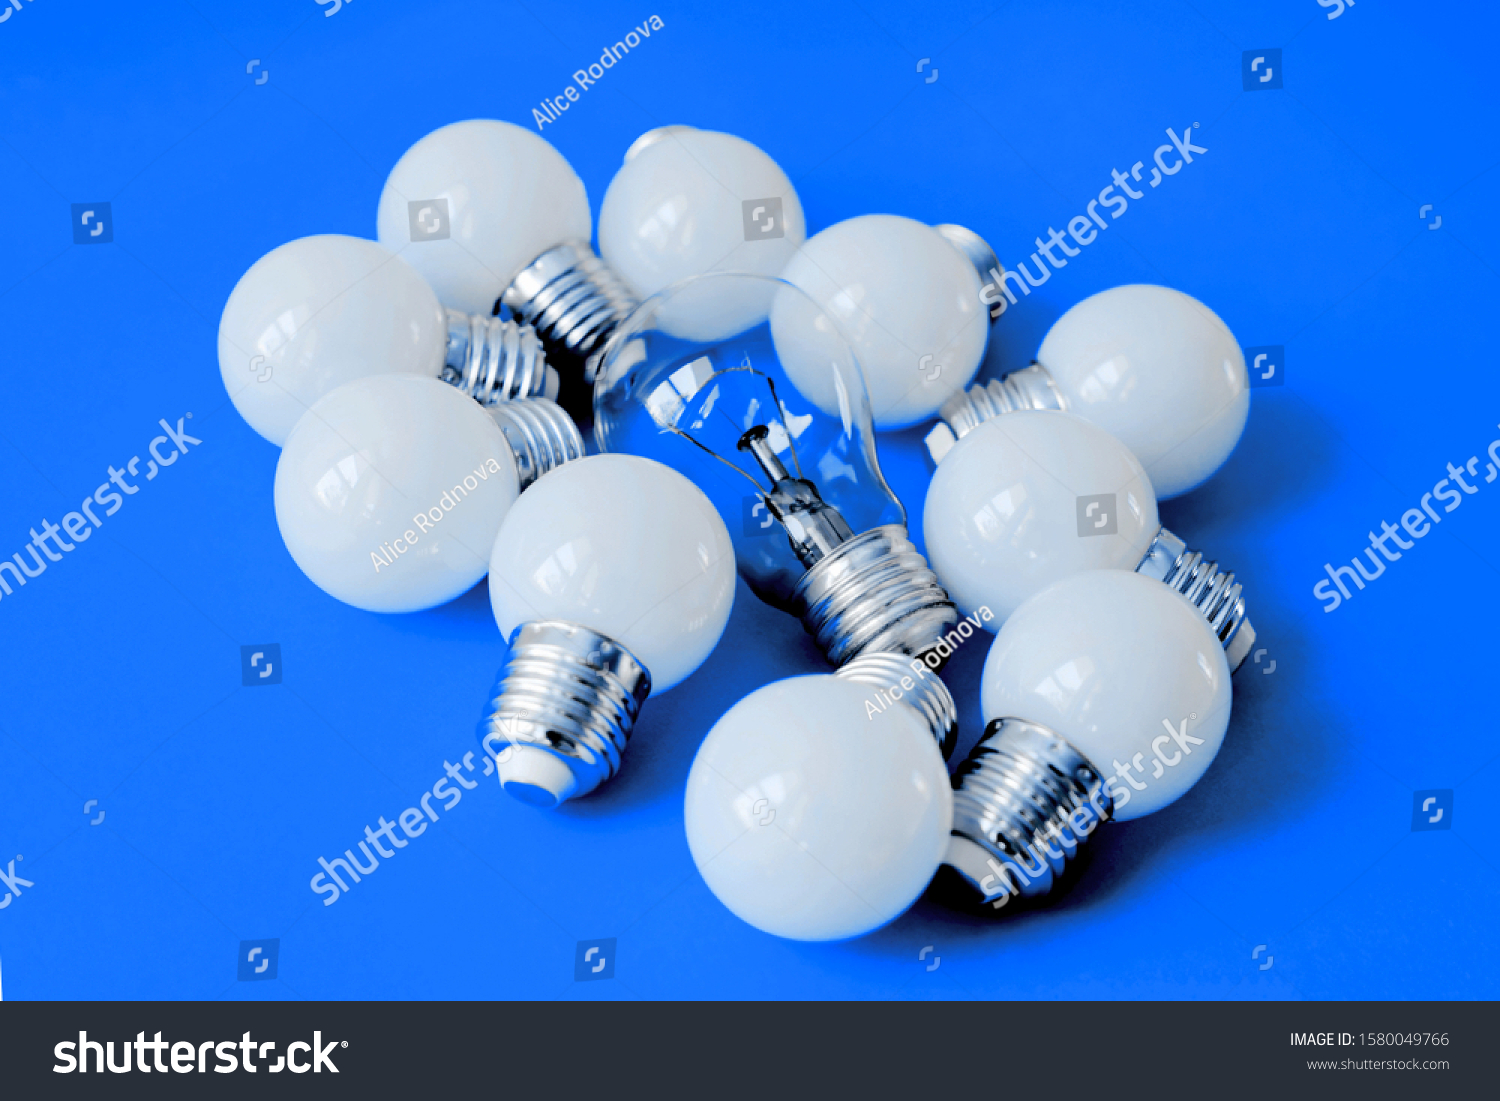 LED lamps on Color of the year 2020 Classic Blue background. Lamps, LED lamps and fluorescent lamps on blue background. White energy-saving light bulbs. Light bulbs lie in a row. #1580049766